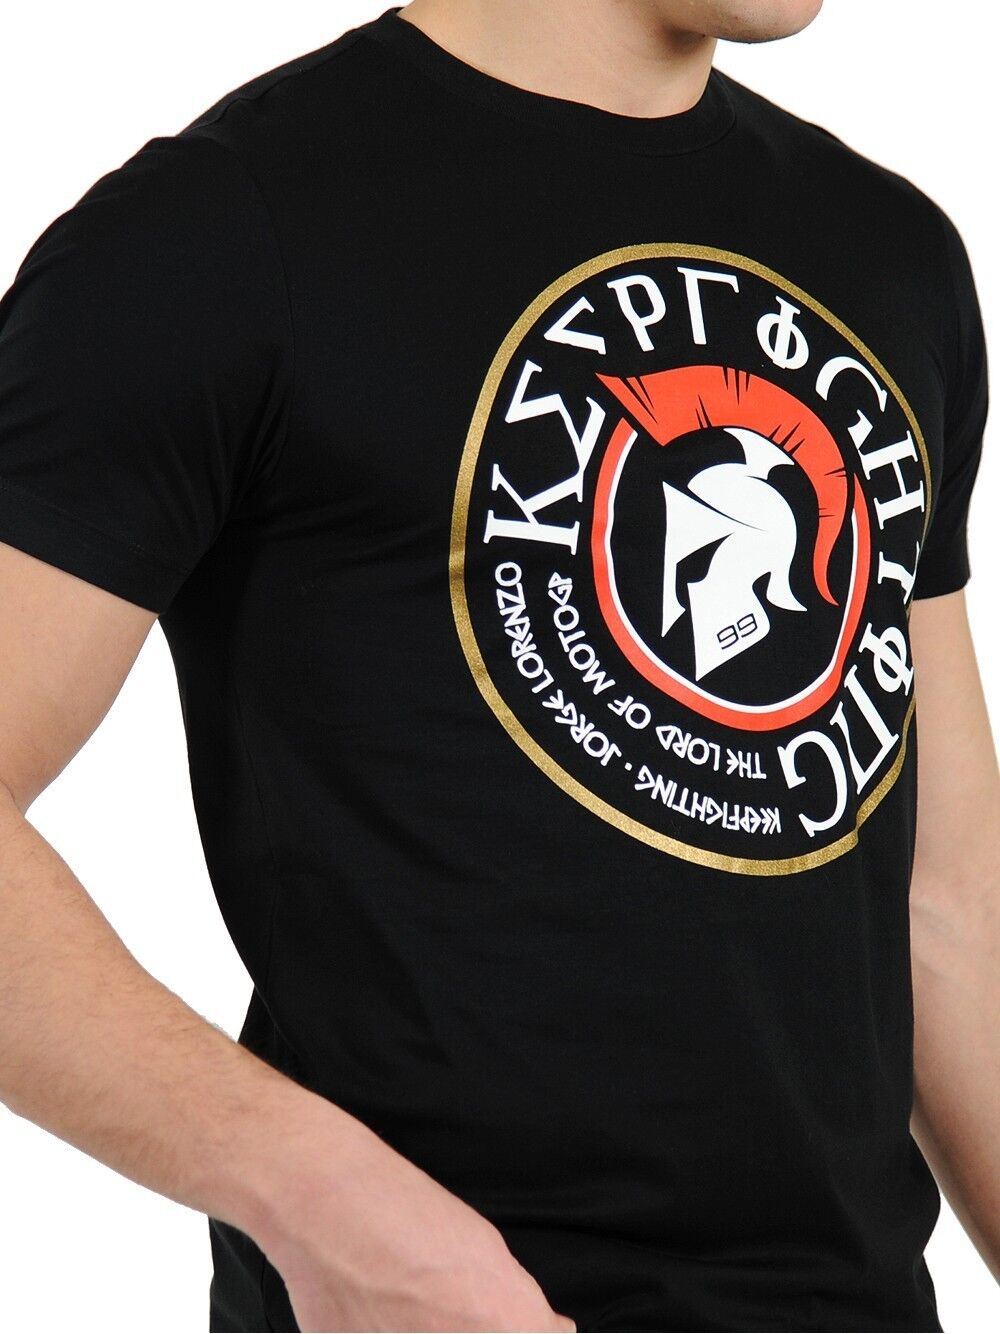 New Official Jorge Lorezno Spartan "Keep Fighting" T'Shirt - 16 31206